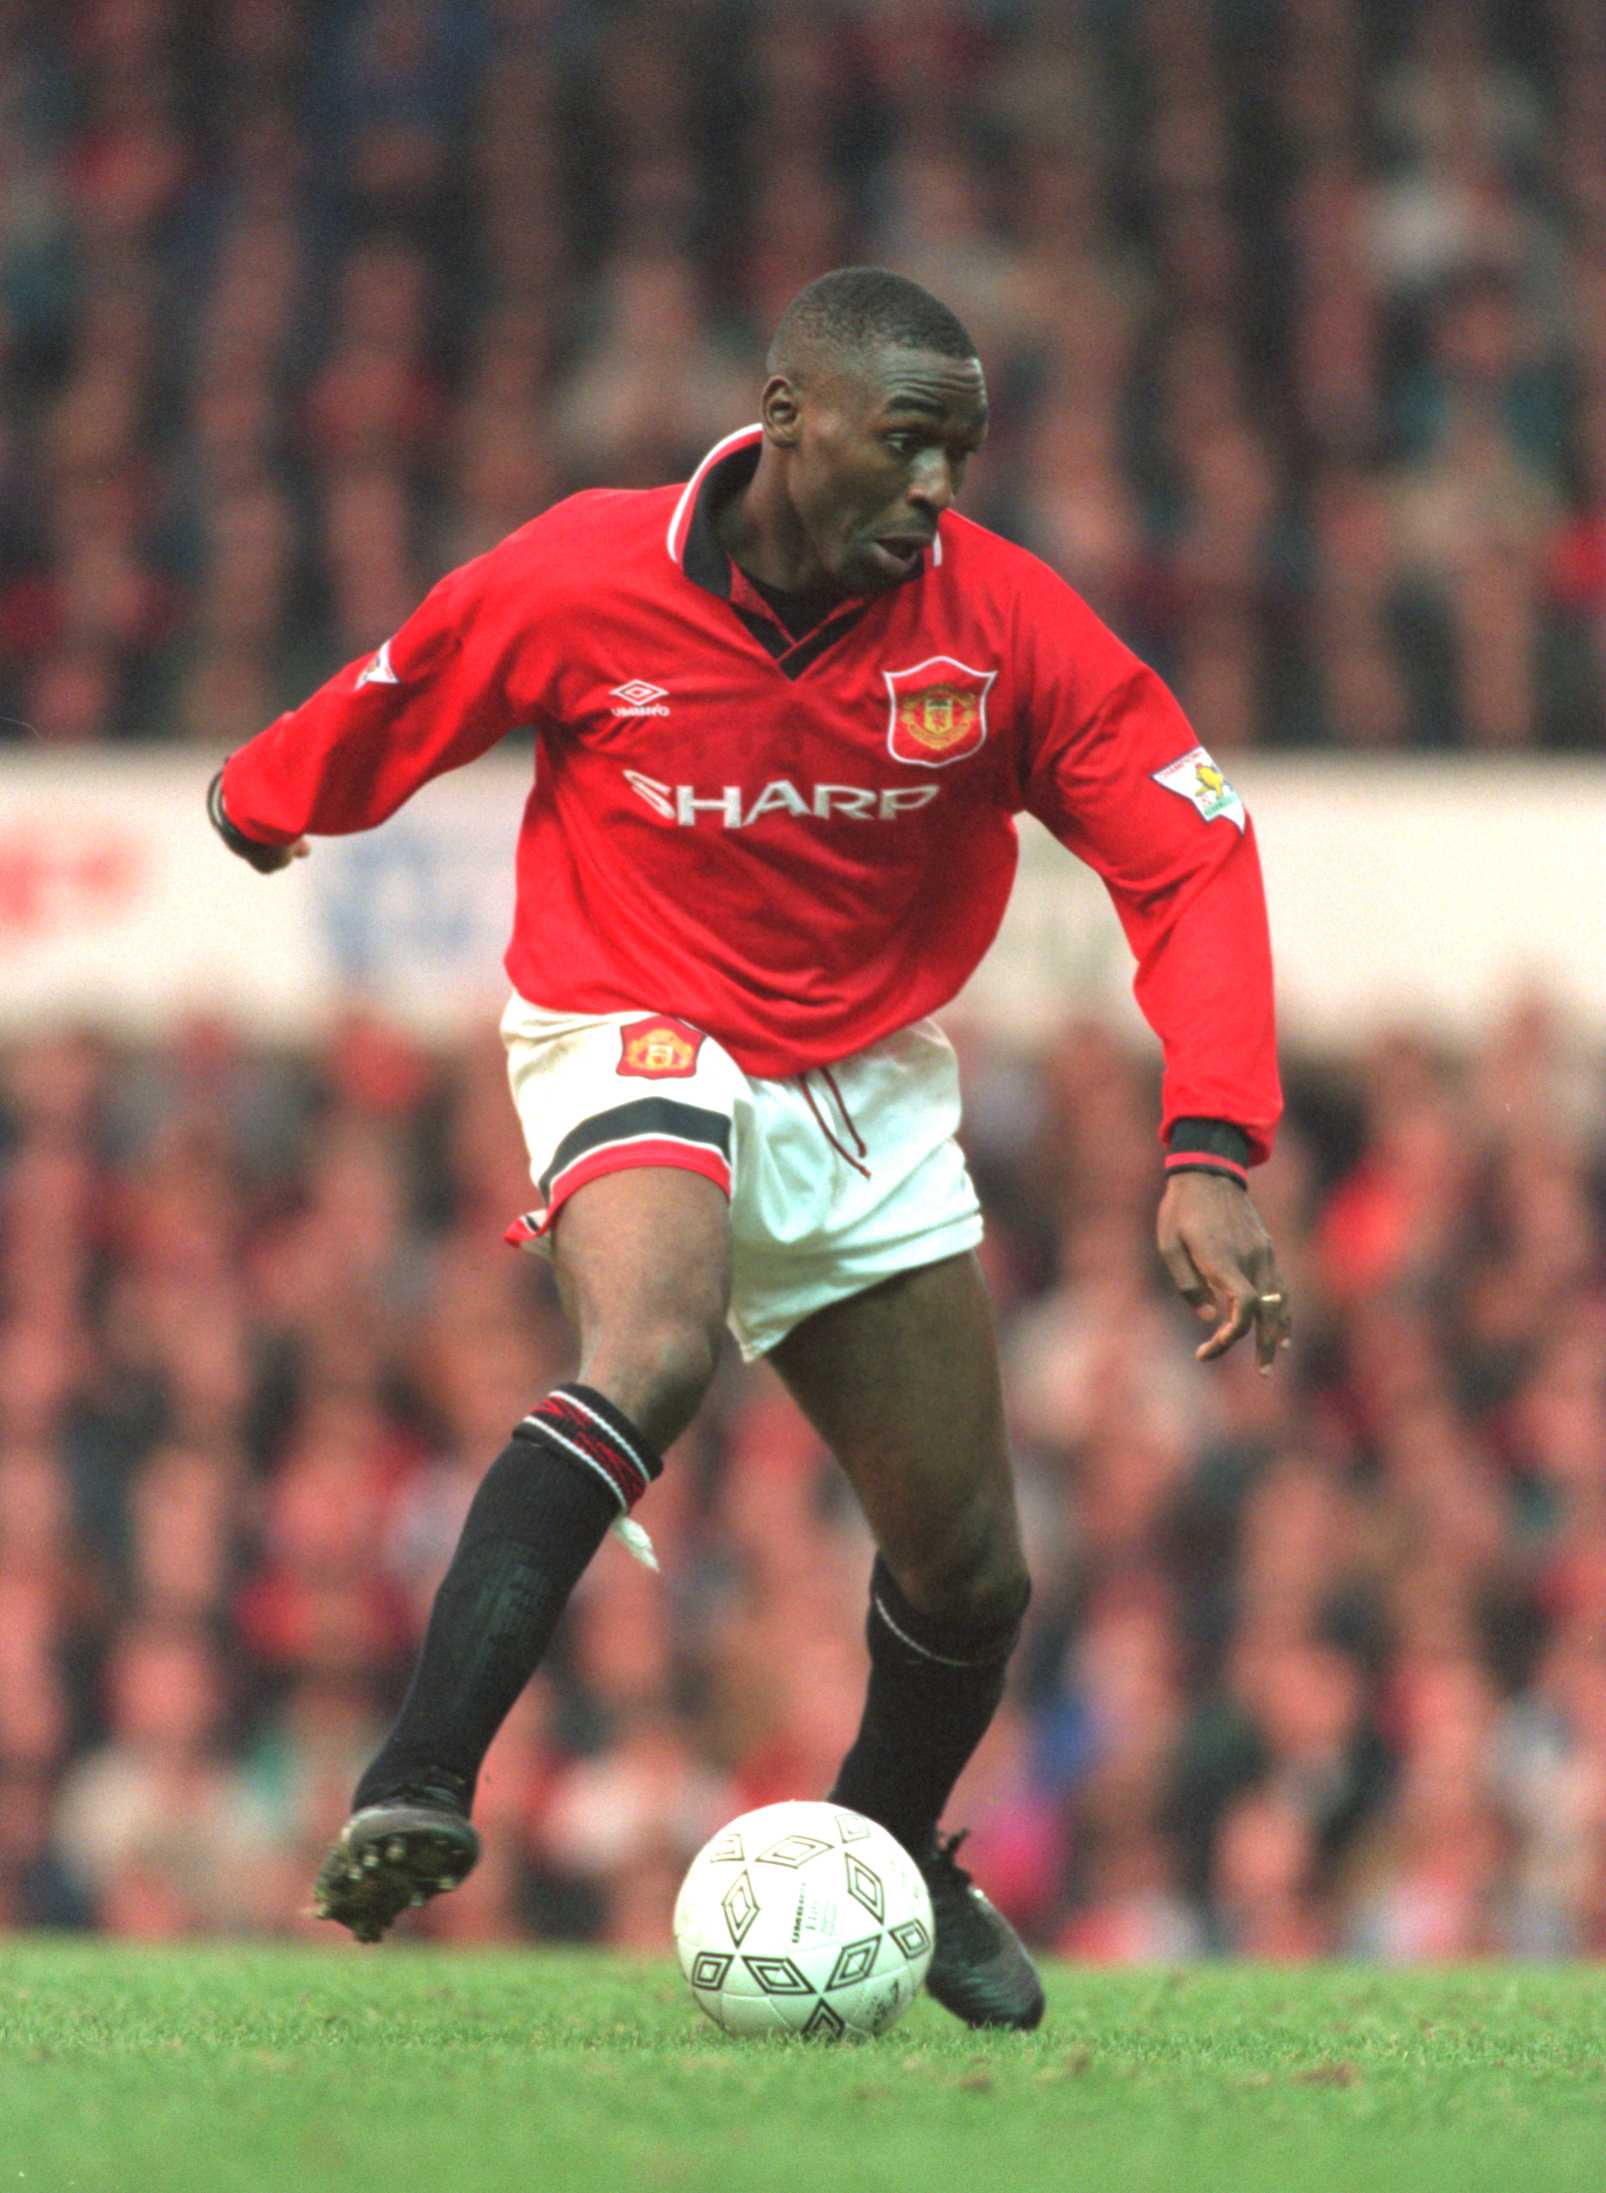 4 FEB 1995:  ANDY COLE OF MANCHESTER UNITED IN ACTION DURING A PREMIERSHIP MATCH AGAINST ASTON VILLA AT OLD TRAFFORD. COLE SCORED THE GOAL IN UNITED's 1-0 VICTORY. Mandatory Credit: Gary Prior/ALLSPORT